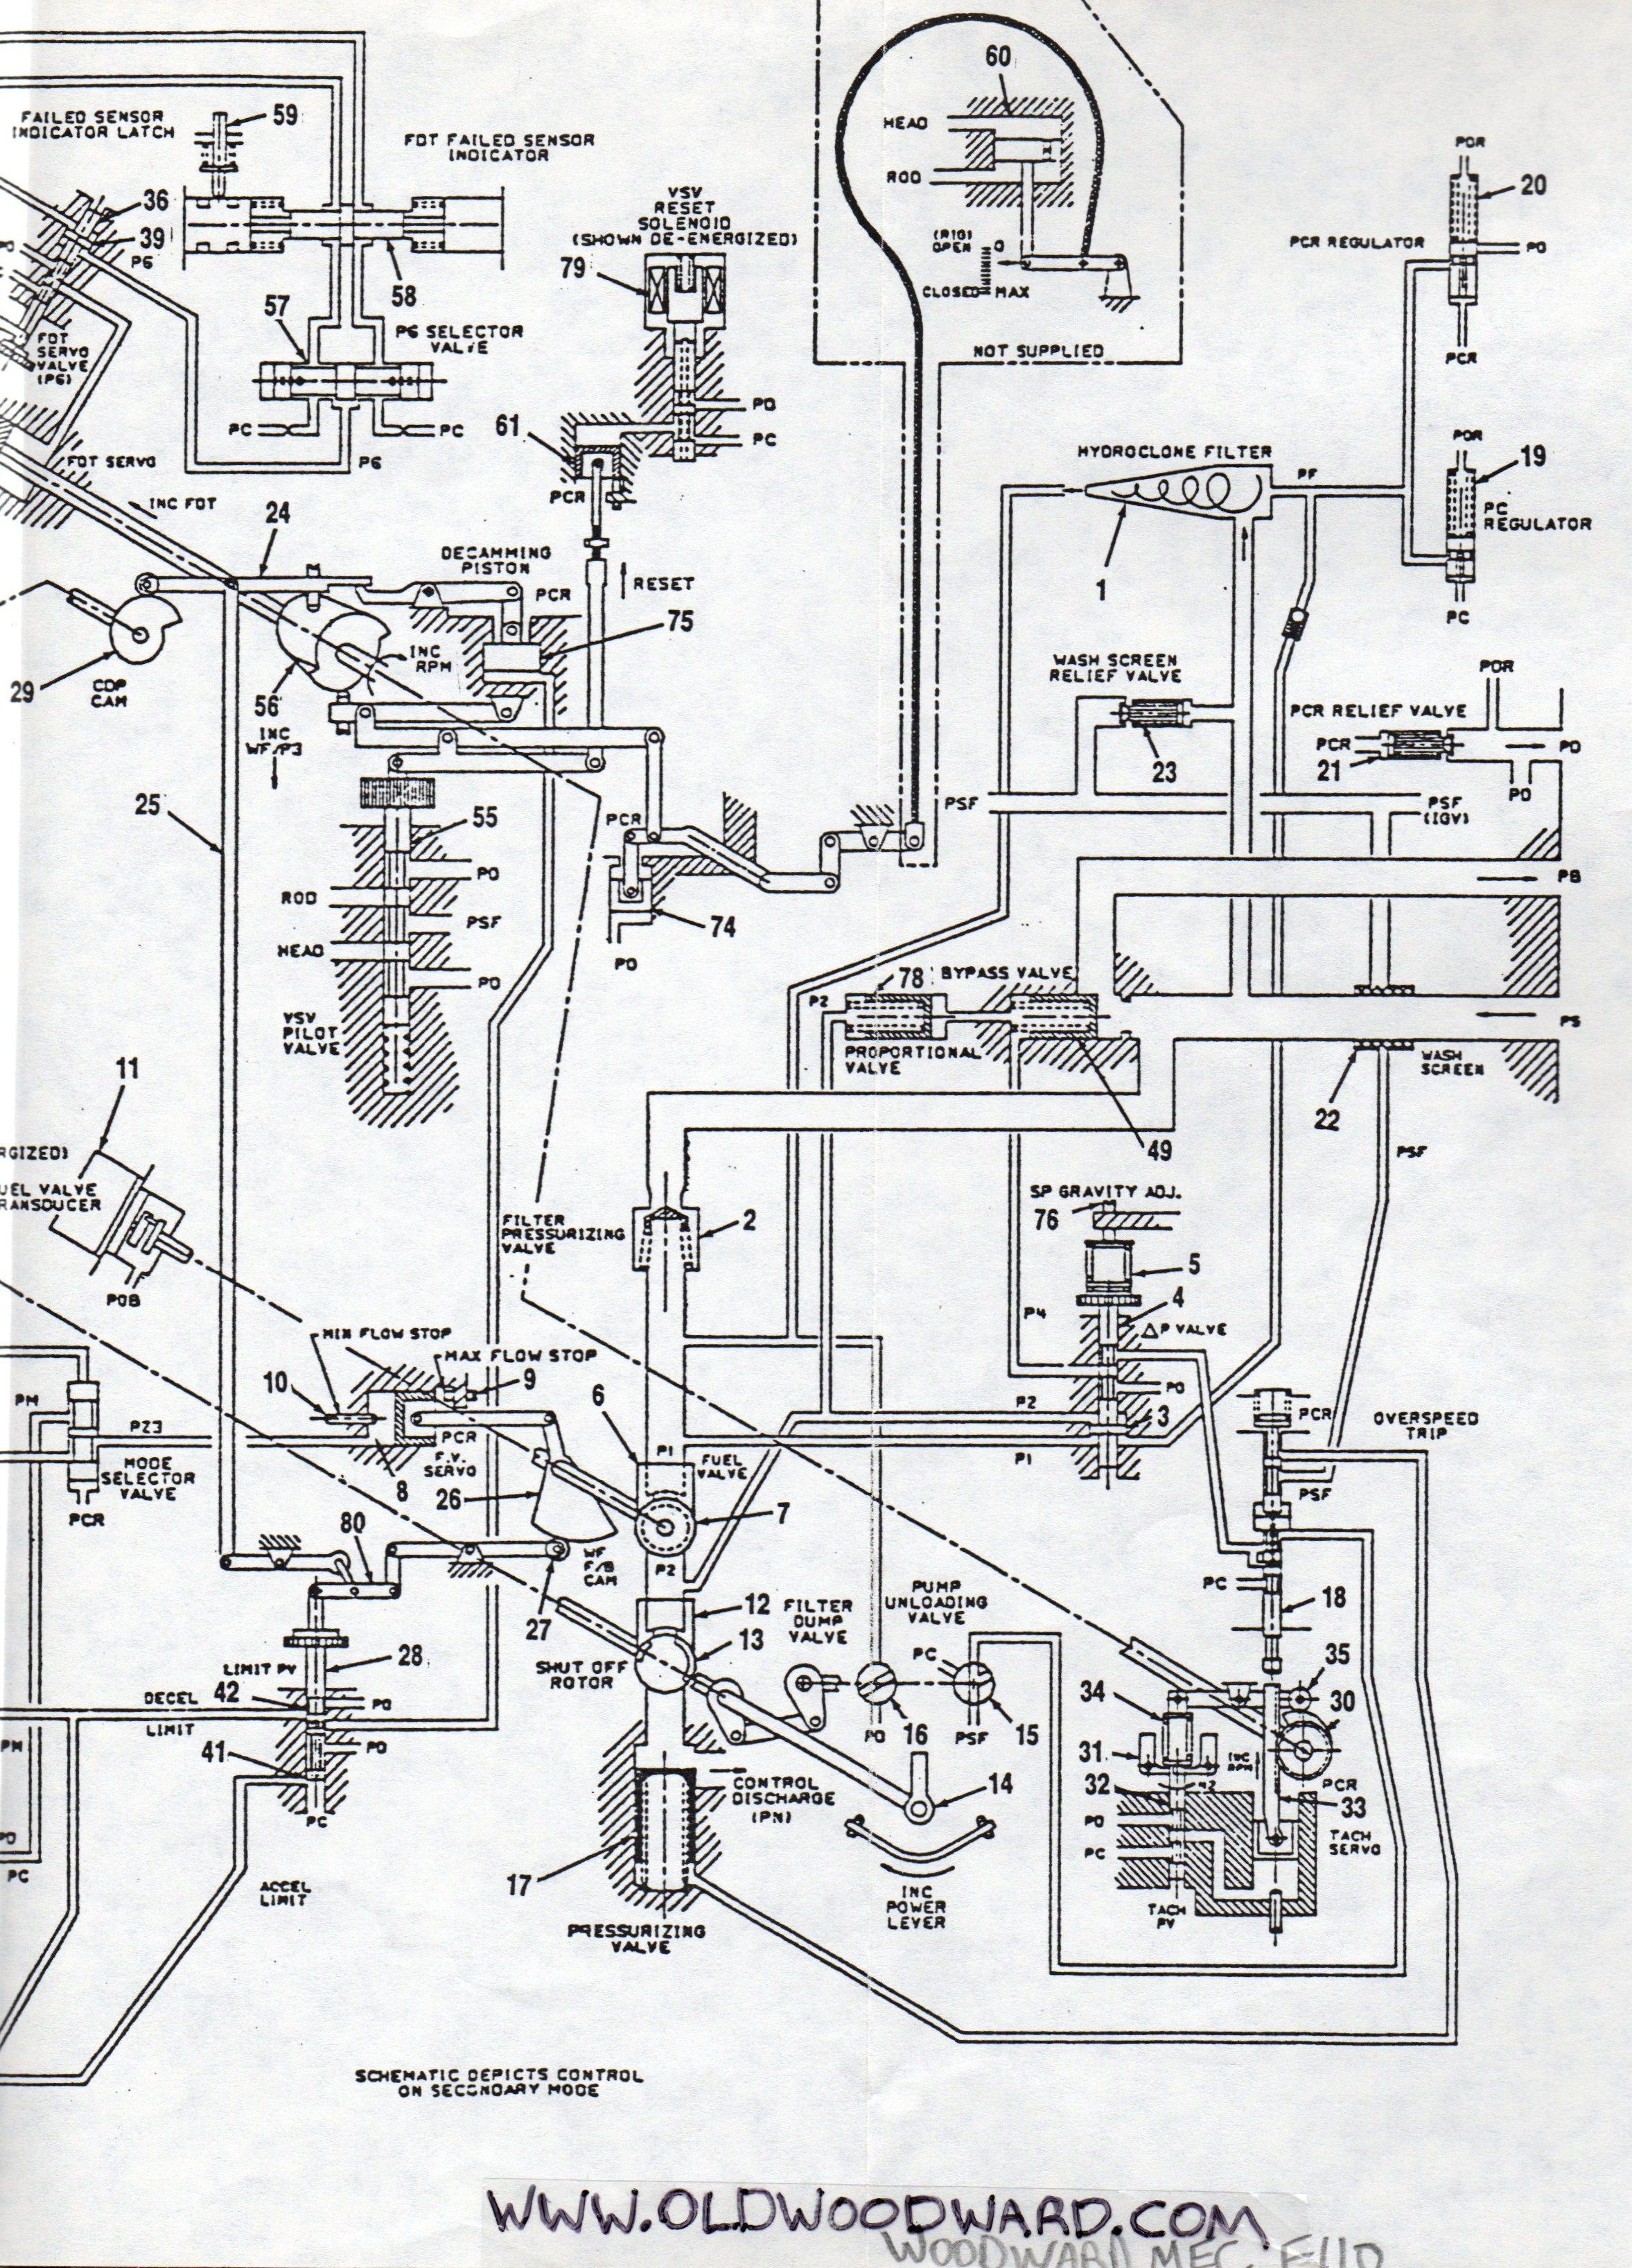 Woodward Governor pany s control system schematic for the General Electric F110 series jet engine